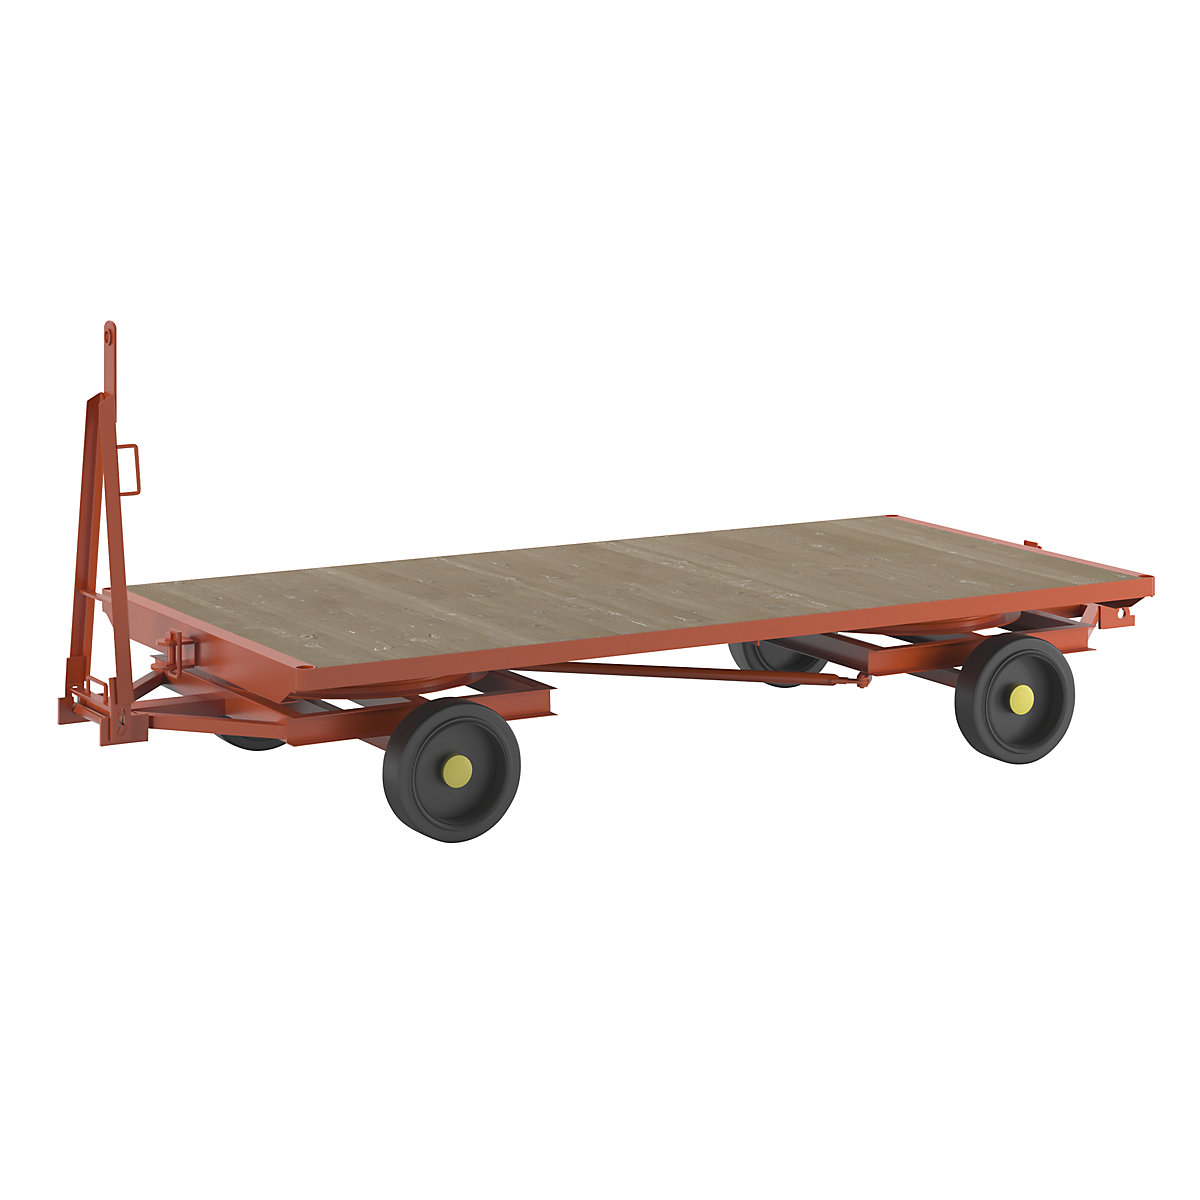 Trailer, 4-wheel double turntable steering, max. load 5 t, platform 3.0 x 1.5 m, solid rubber tyres-6